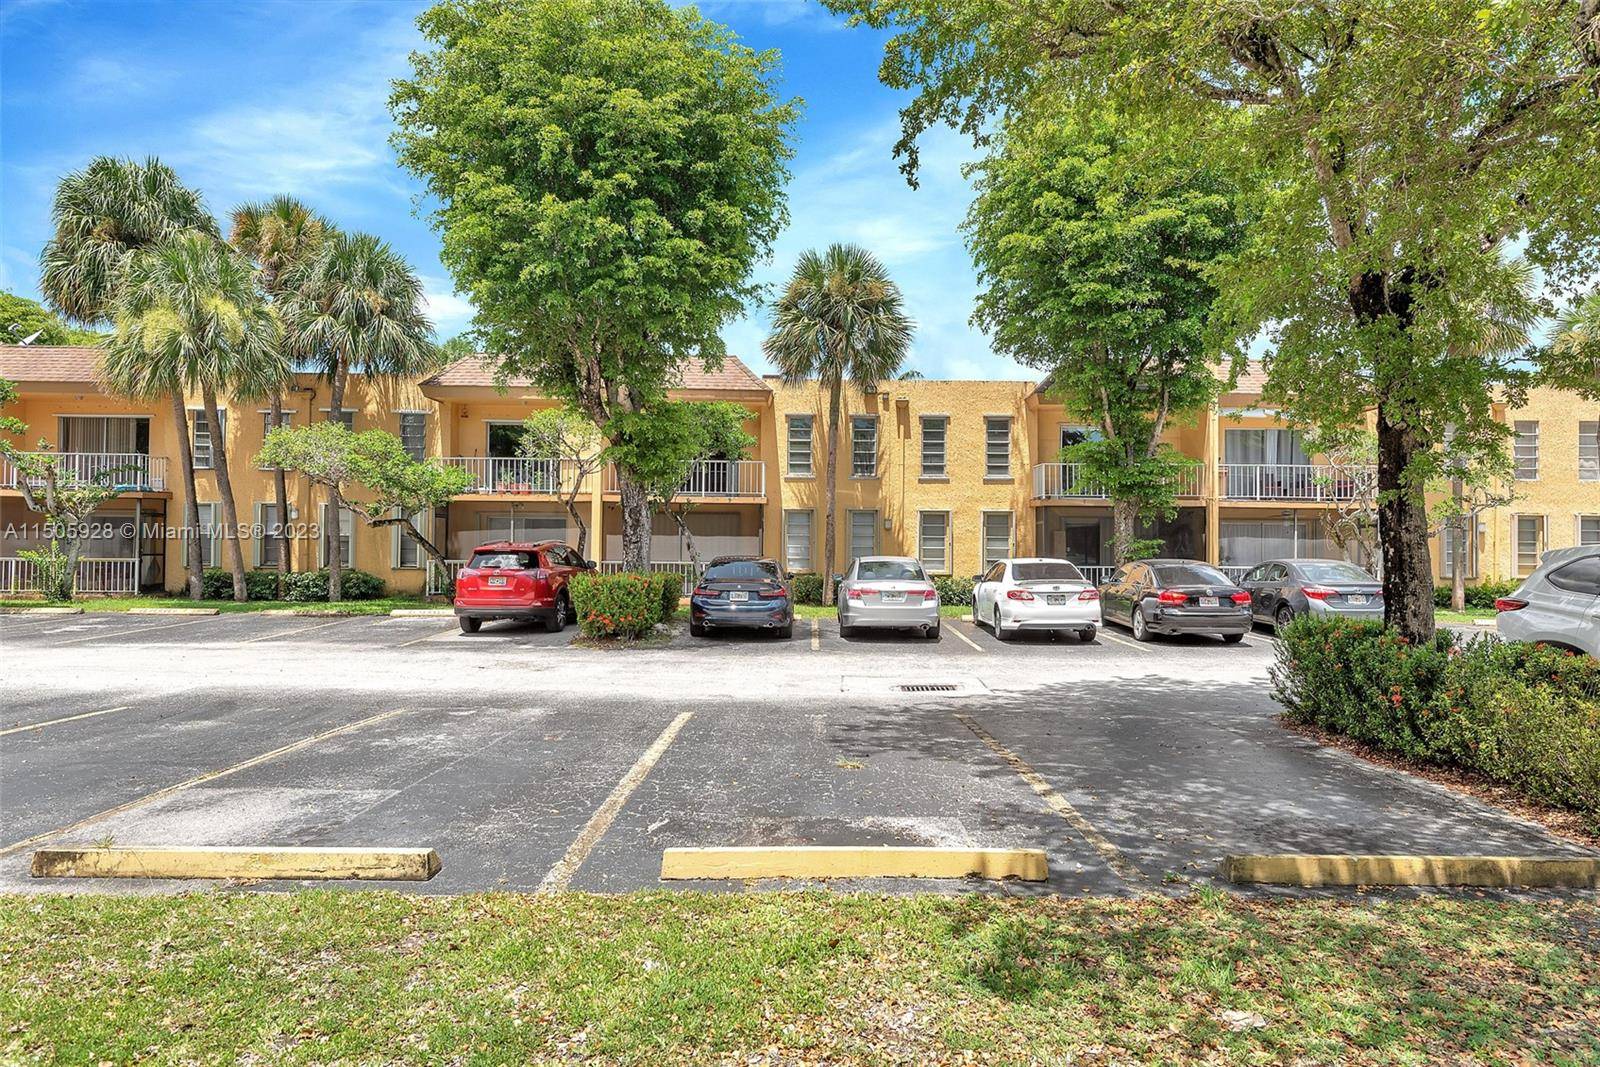 Price to Sell ! ! This an amazing opportunity to own a spacious 3 bedroom 2 bath condo in the heart of Kendall.